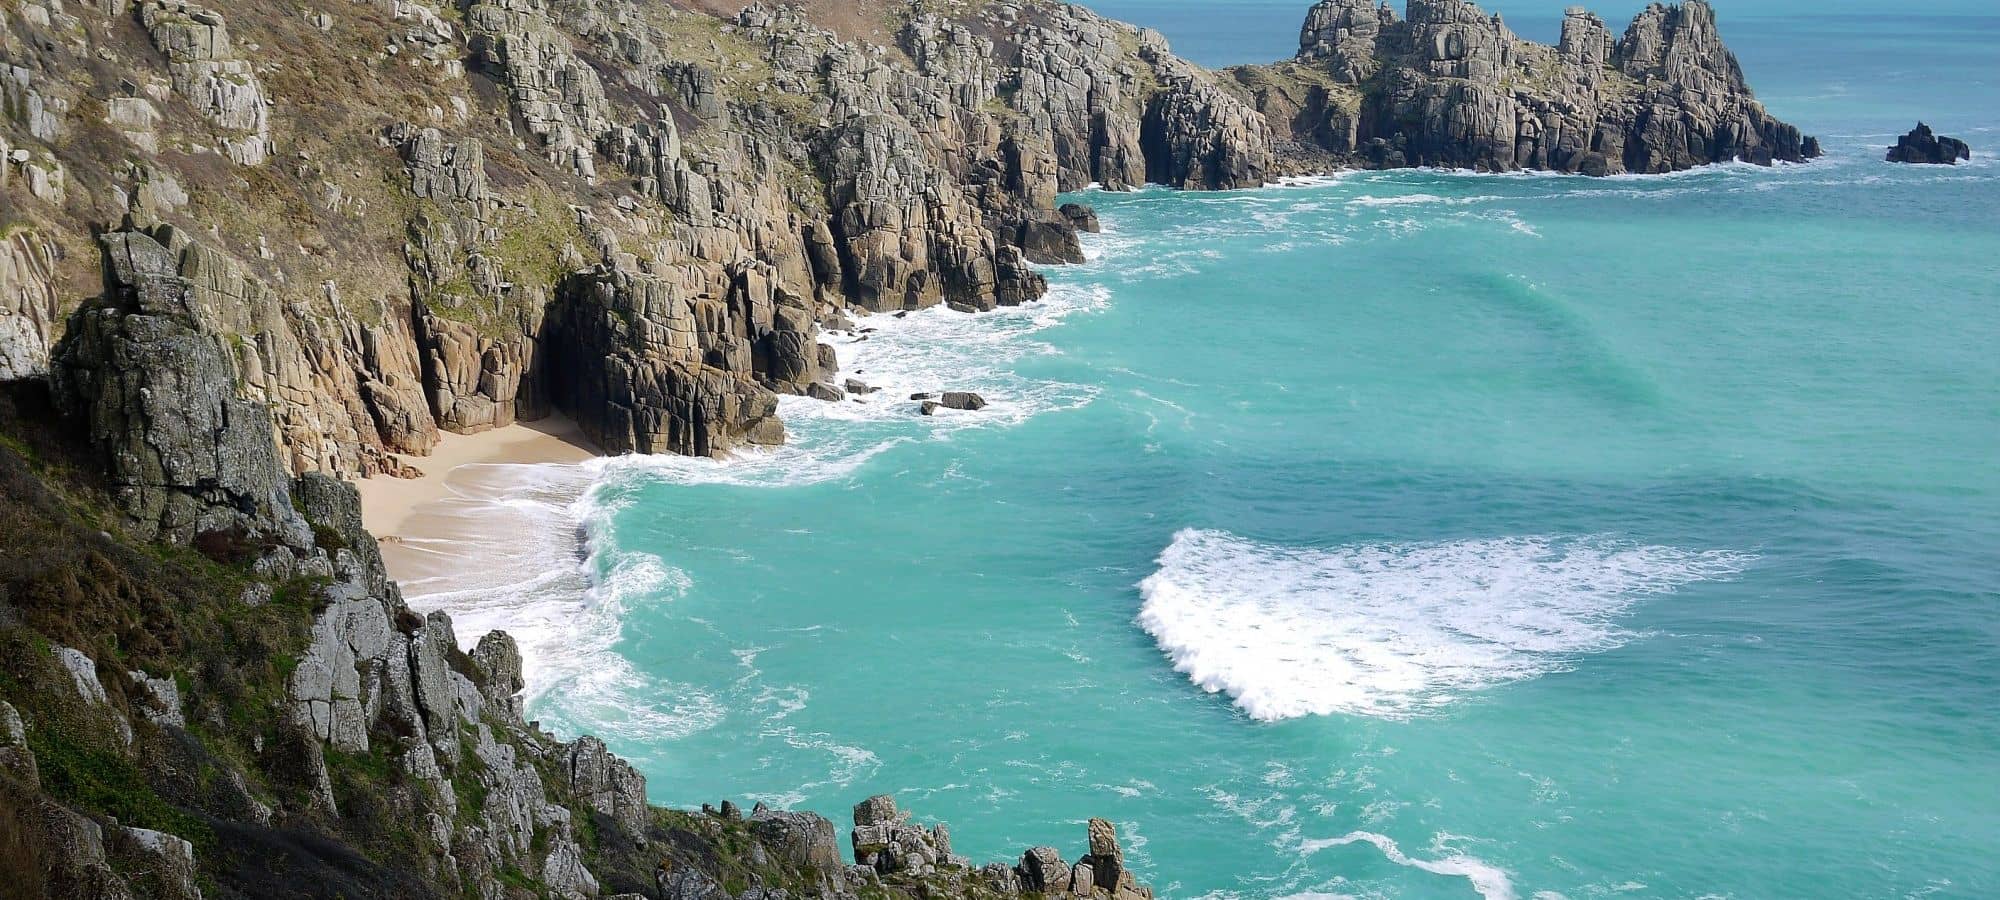 Porthcurno and Pedn Founder, West Cornwall